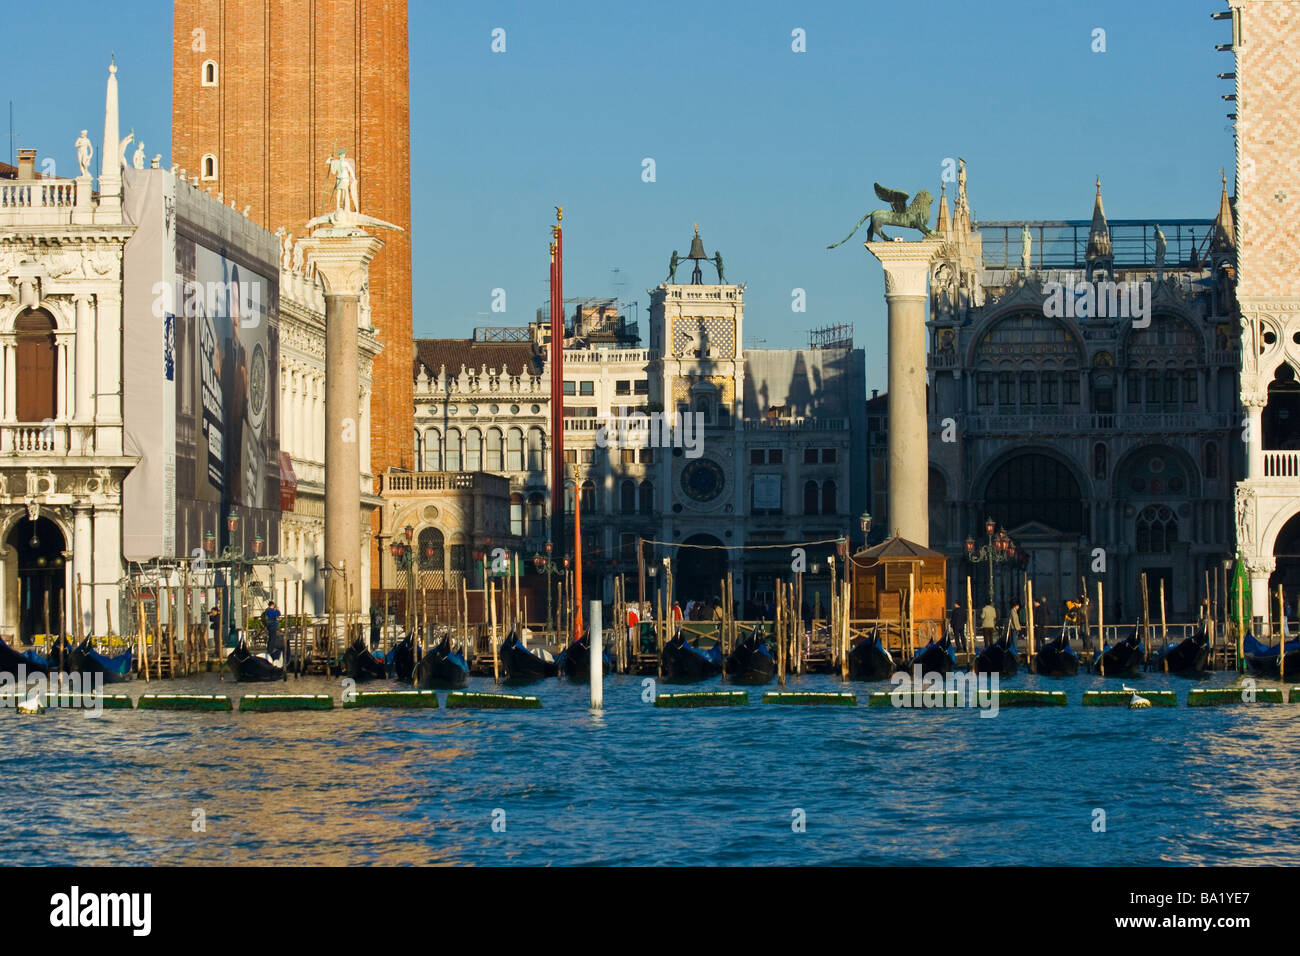 Piazza San Marco as seen from the Grand Canal in Venice Italy Stock Photo